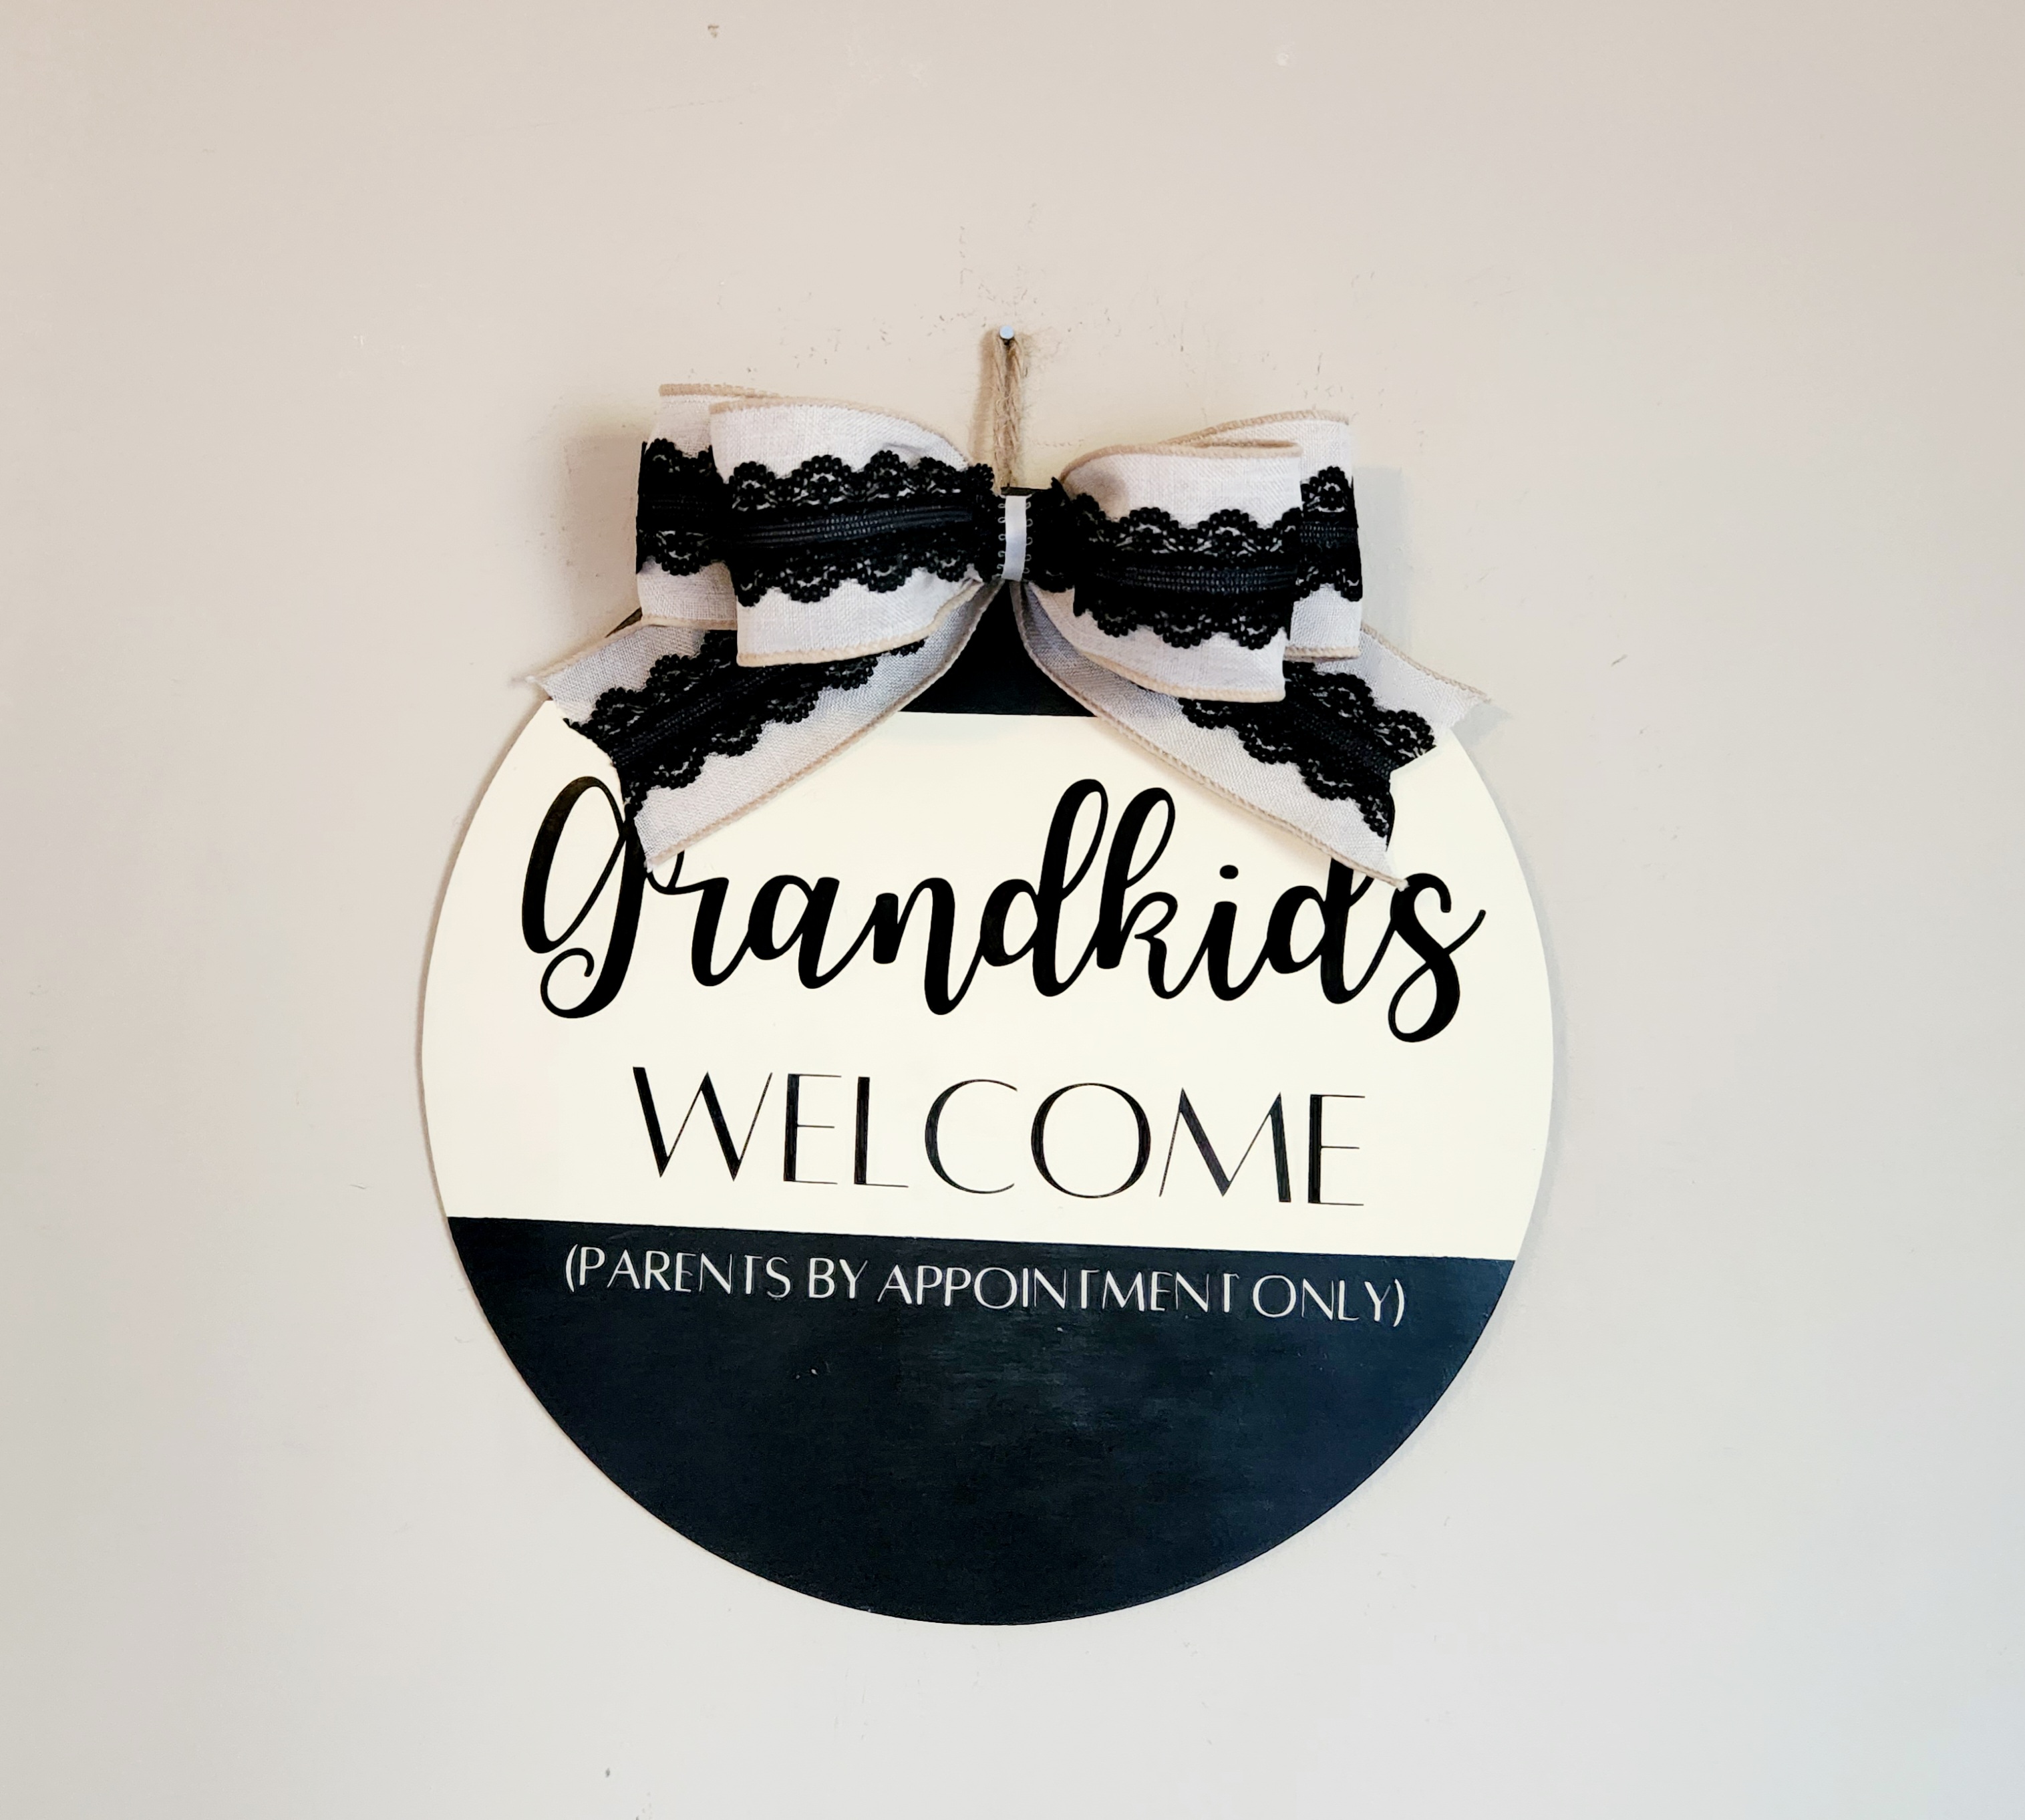 Round sign with color blocks of black, ivory, and black at the bottom saying in the middle "Grandkids Welcome (parents by appointment only)" topped with a khaki linen and black lace bow.